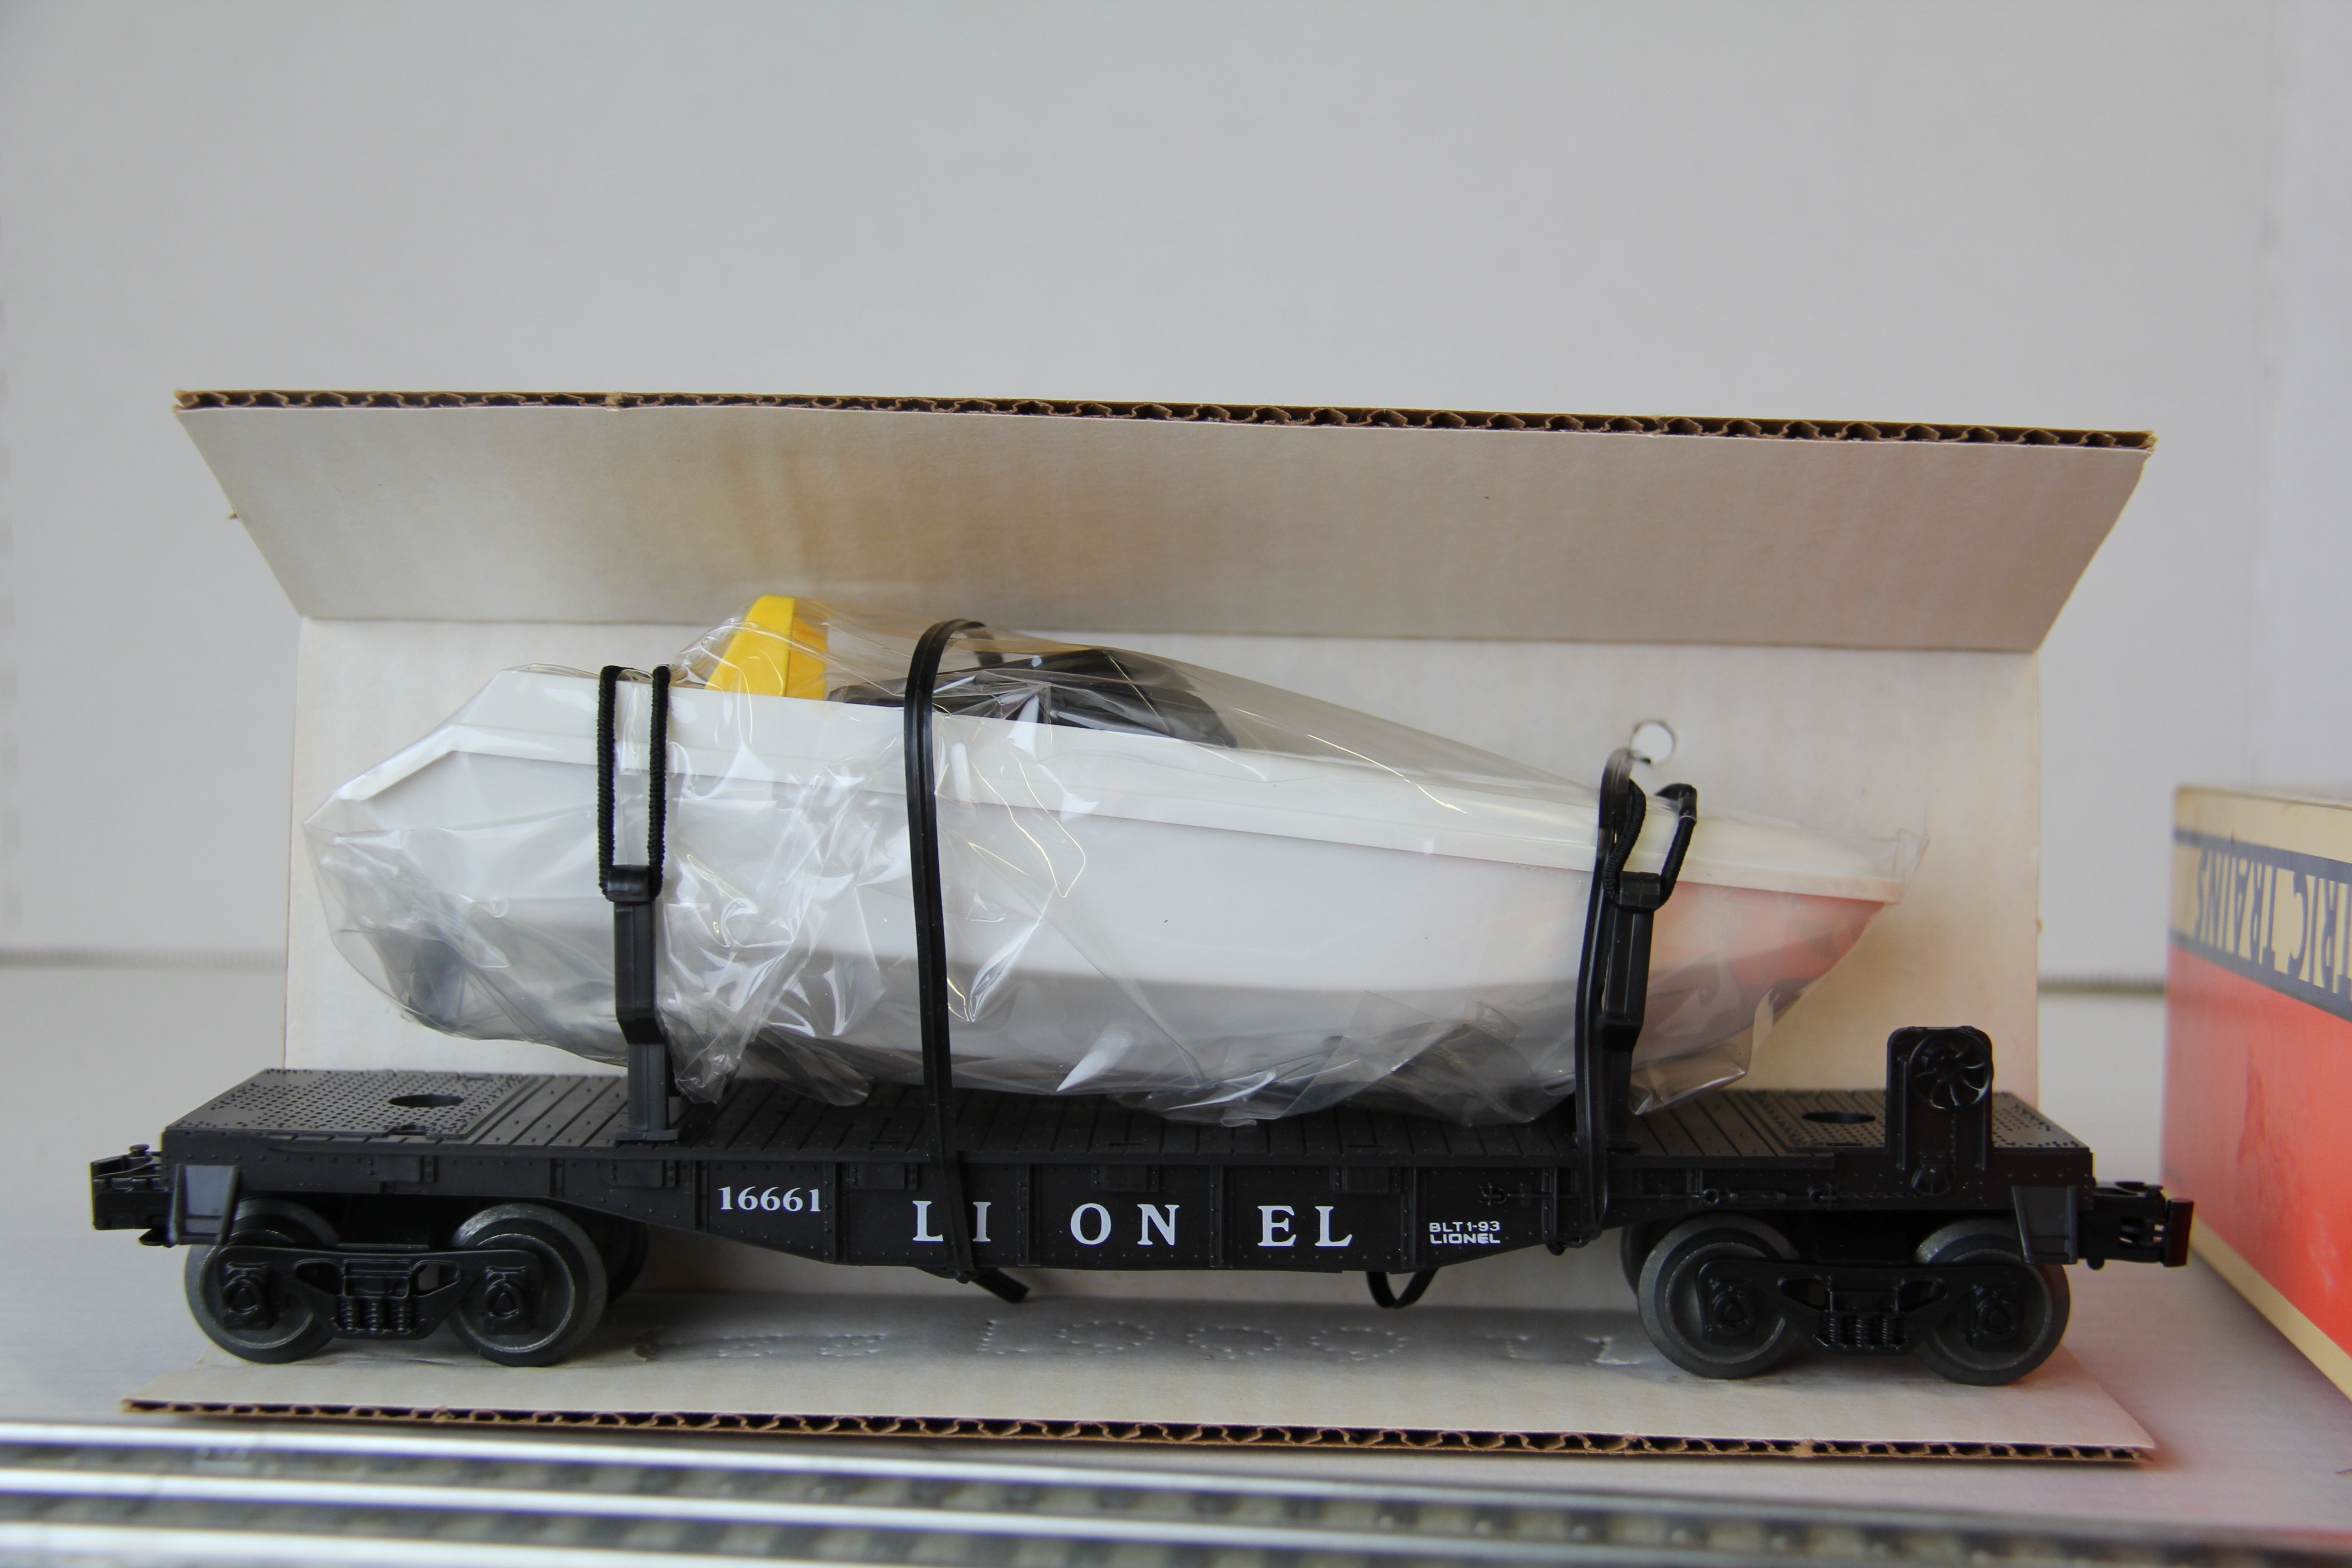 Lionel 6-1661 Flatcar with Operating Boat-Second hand-M4003